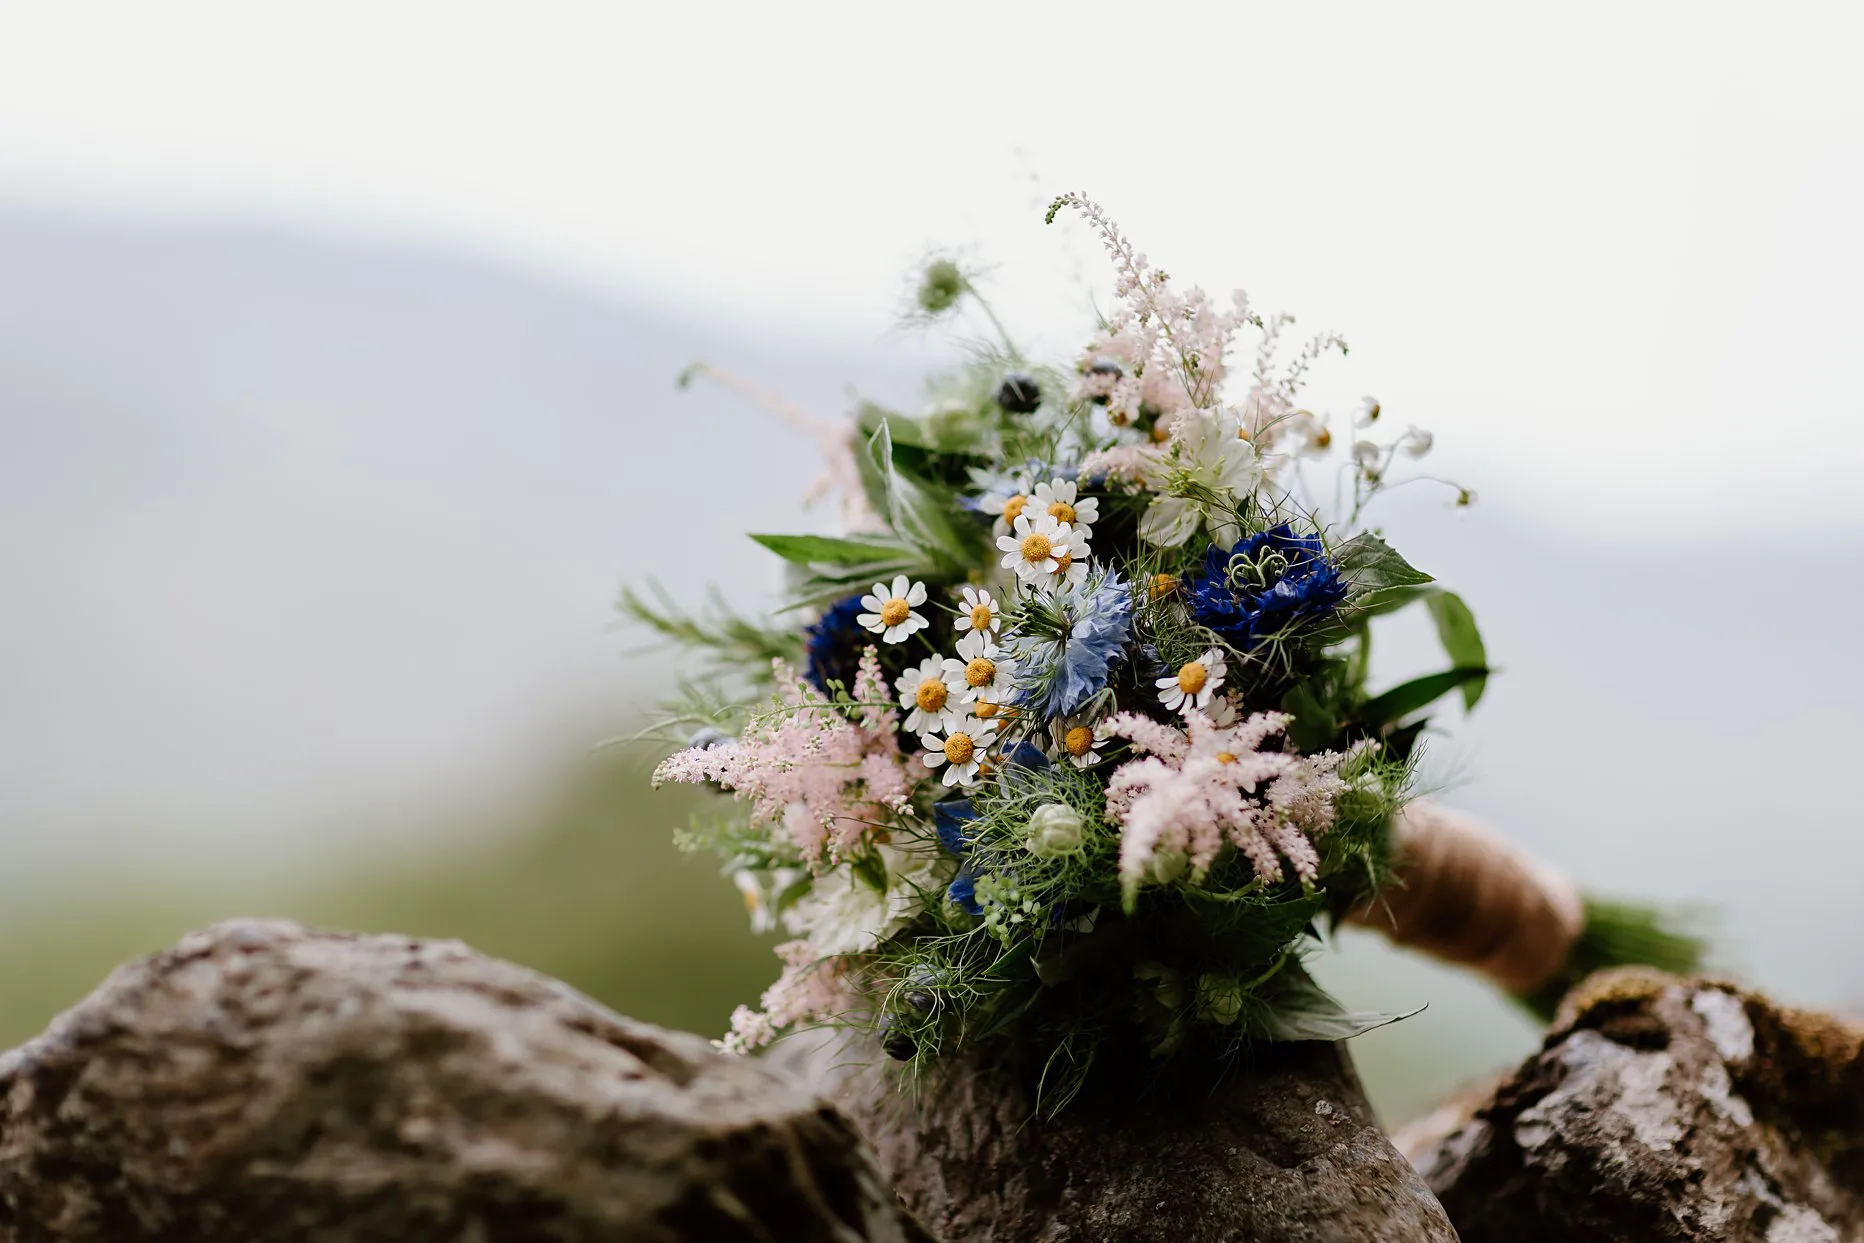 Rustic brides bouquet filled with wild flowers. Rested on a stone wall in the Lake District.